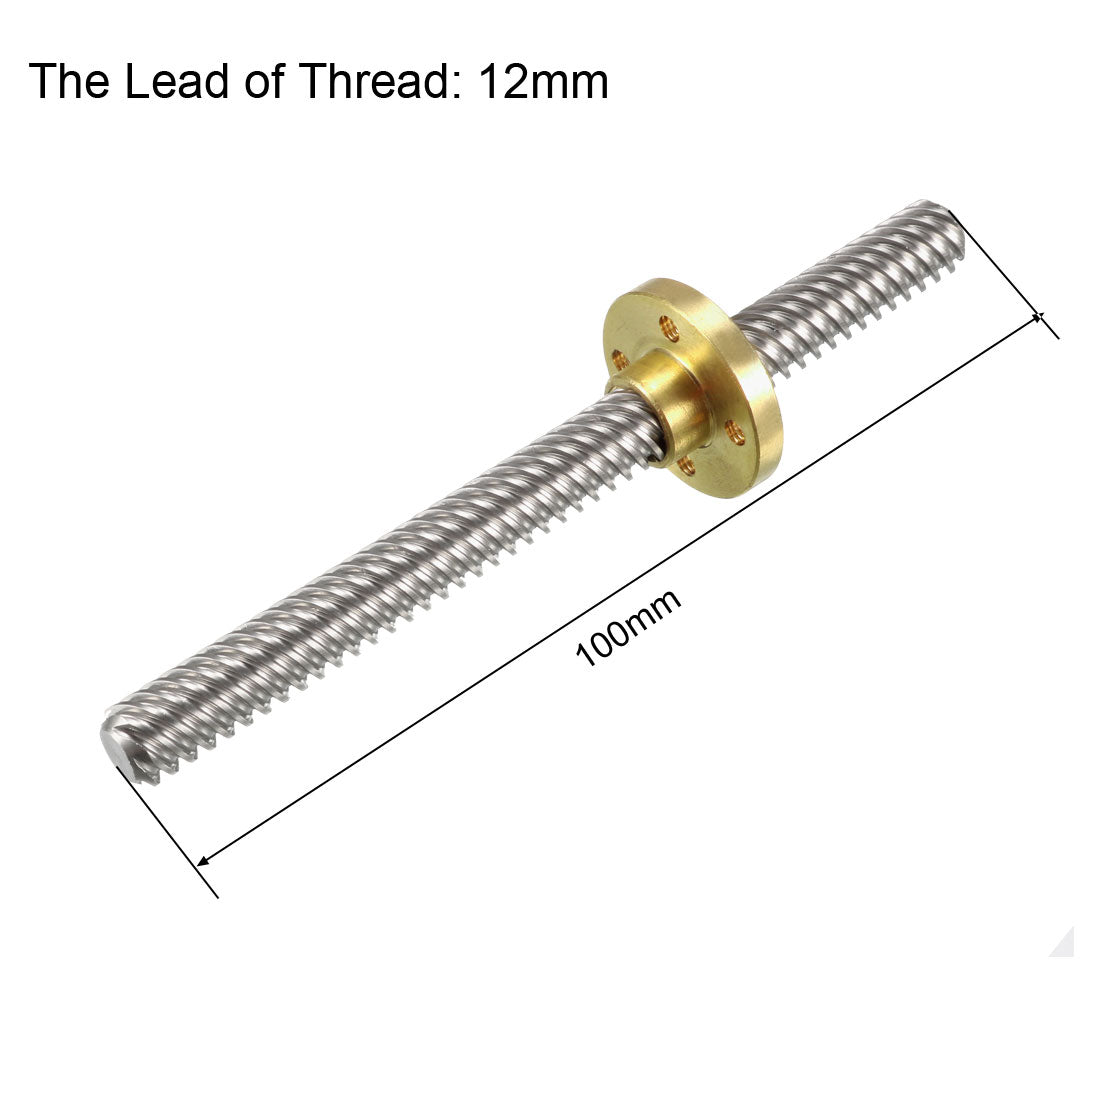 uxcell Uxcell 2PCS 100mm T8 Pitch 2mm Lead 12mm Lead Screw Rod with Copper Nut for 3D Printer